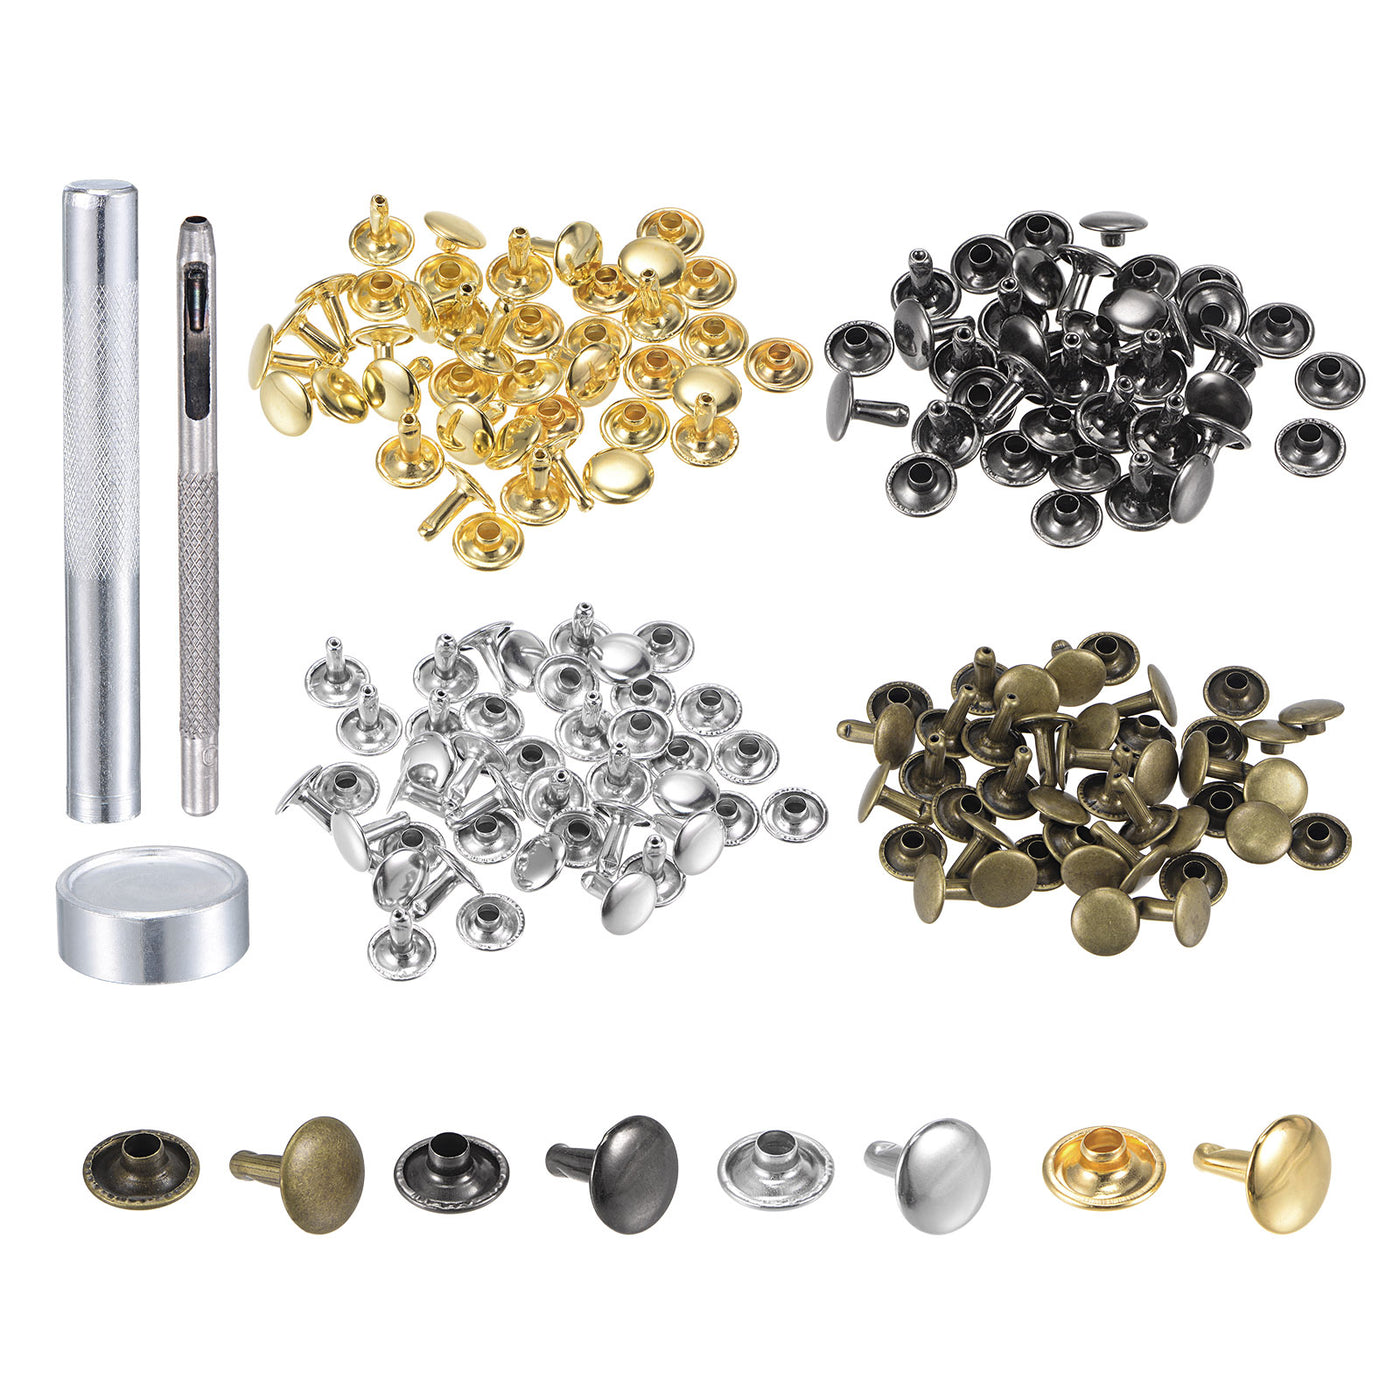 uxcell Uxcell 80 Sets Leather Rivets Kit 4 Colors 10mm Brass Rivet Studs with Setting Tools